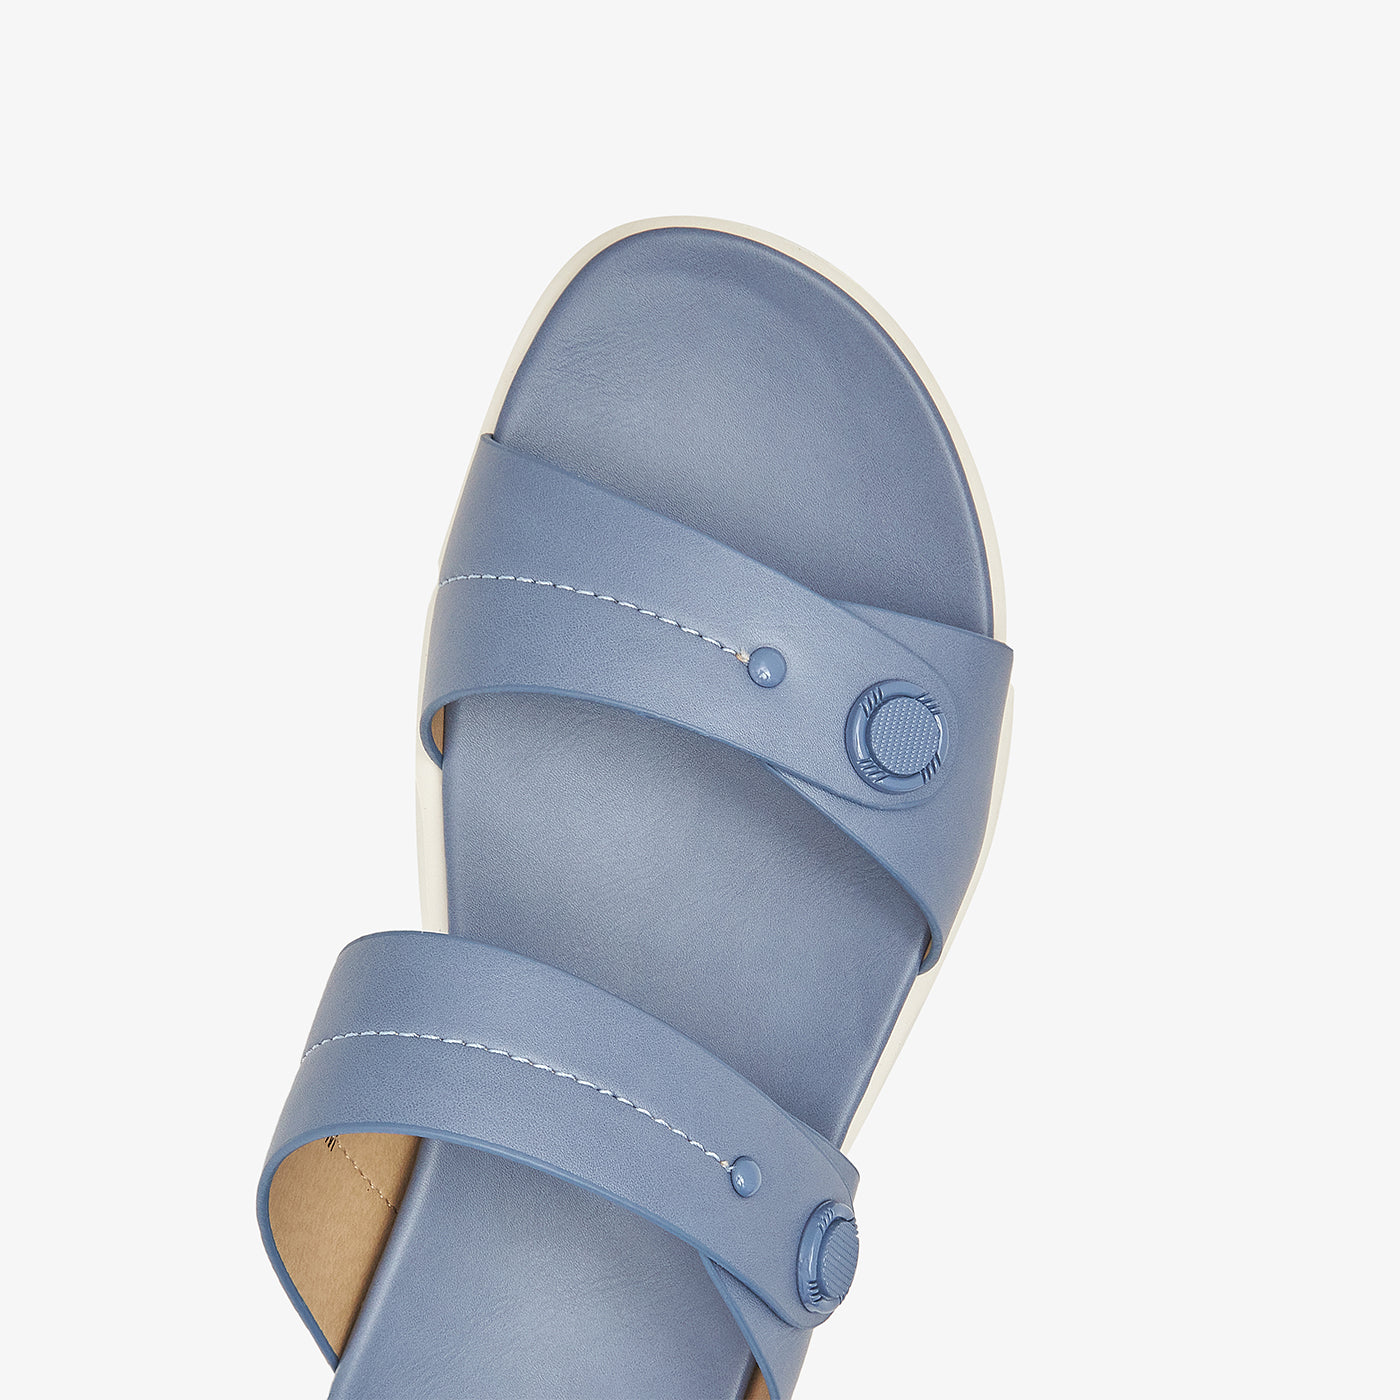 Ultra Comfortable Double Strap Buckled Chappals